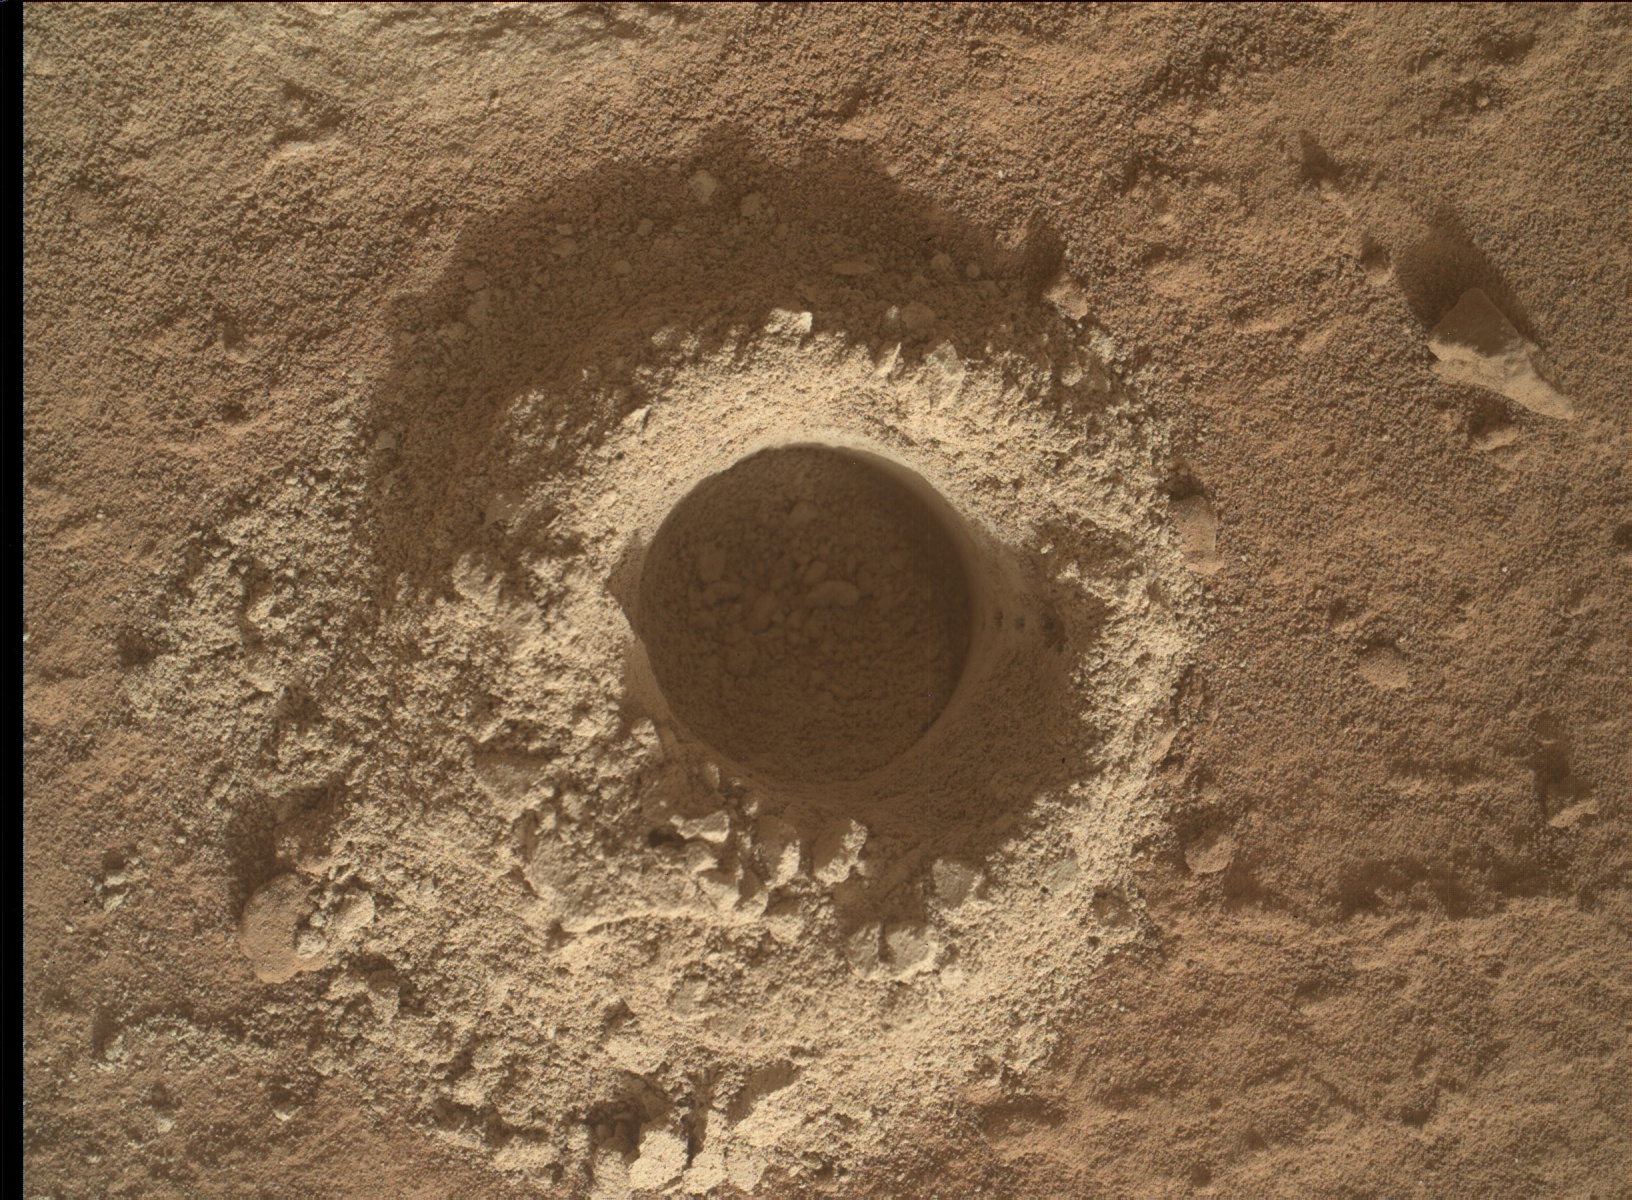 An overhead image of Martian terrain, light orange-brown and resembling a bundt-cake pan viewed from above. A dark drill hole is at center, surrounded by a doughnut-shaped area of soft-looking soil scraped from the hard-packed surface.